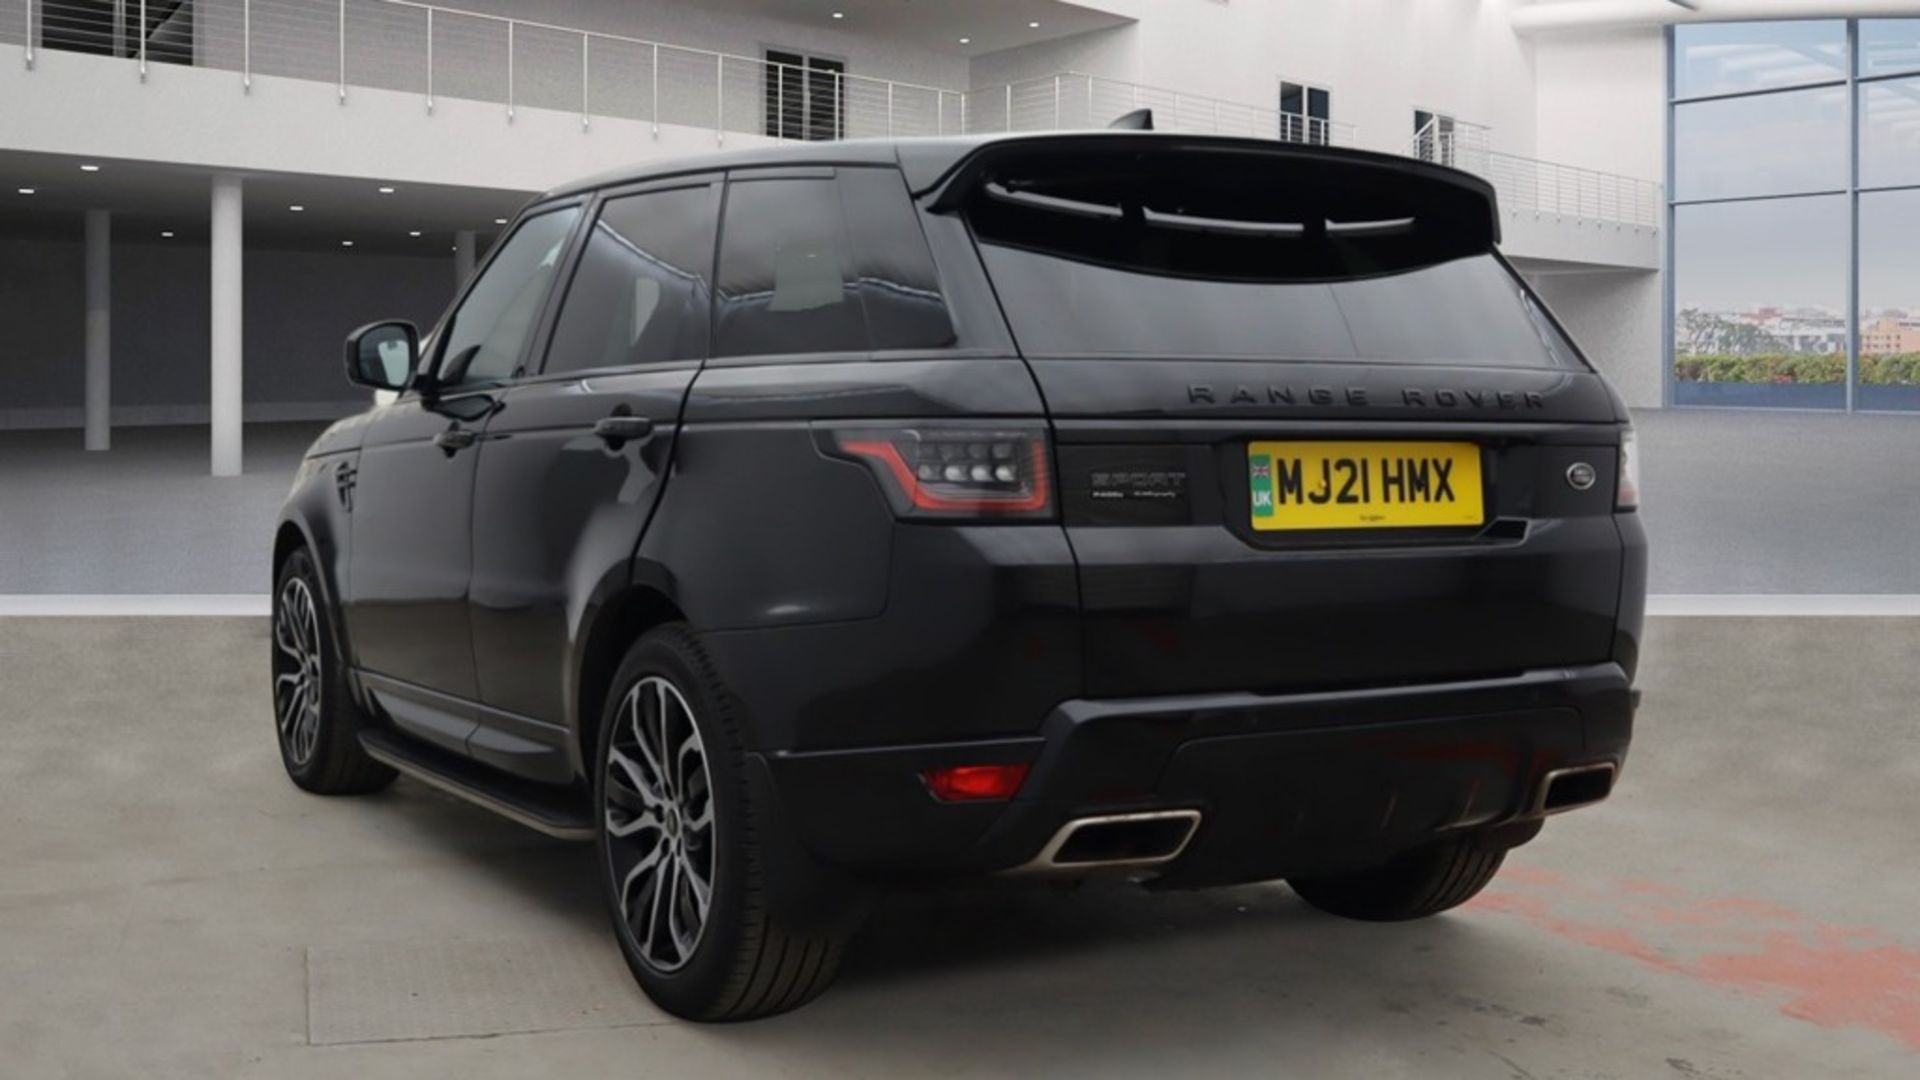 ** ON SALE ** Land Rover Range Rover Sport 2.0 P400E Autobiography Dynamic 2021'21 Reg' - Image 3 of 9